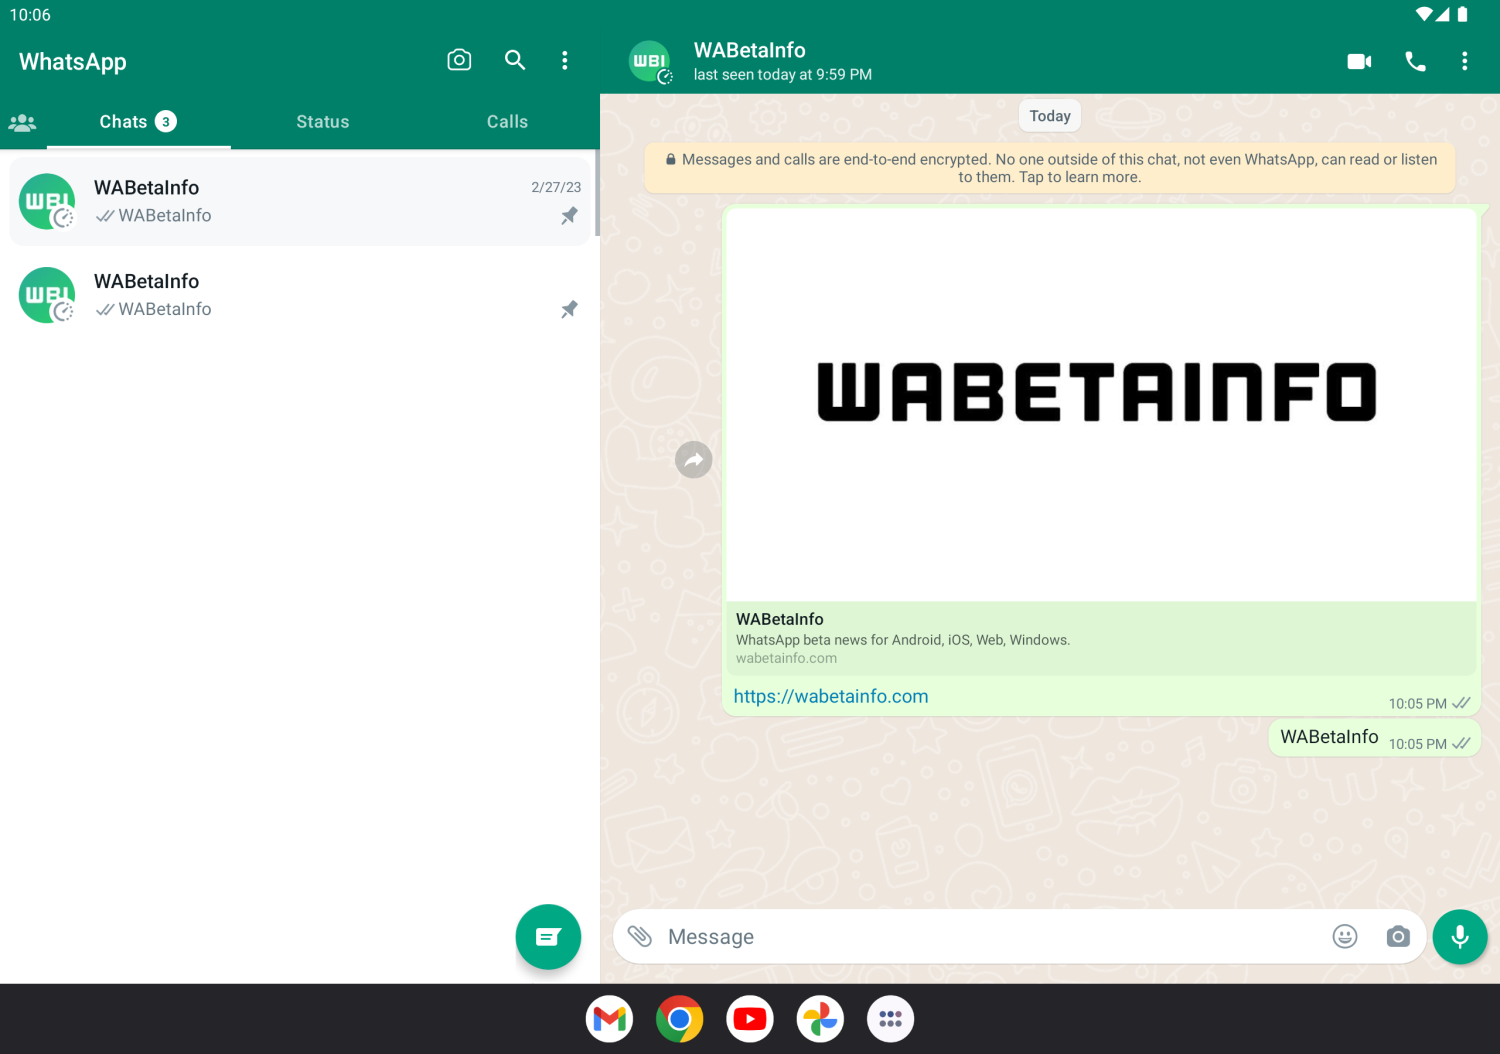 TweakTown Enlarged Image - WhatsApp beta on Android tablet - Image source: wabetainfo.com